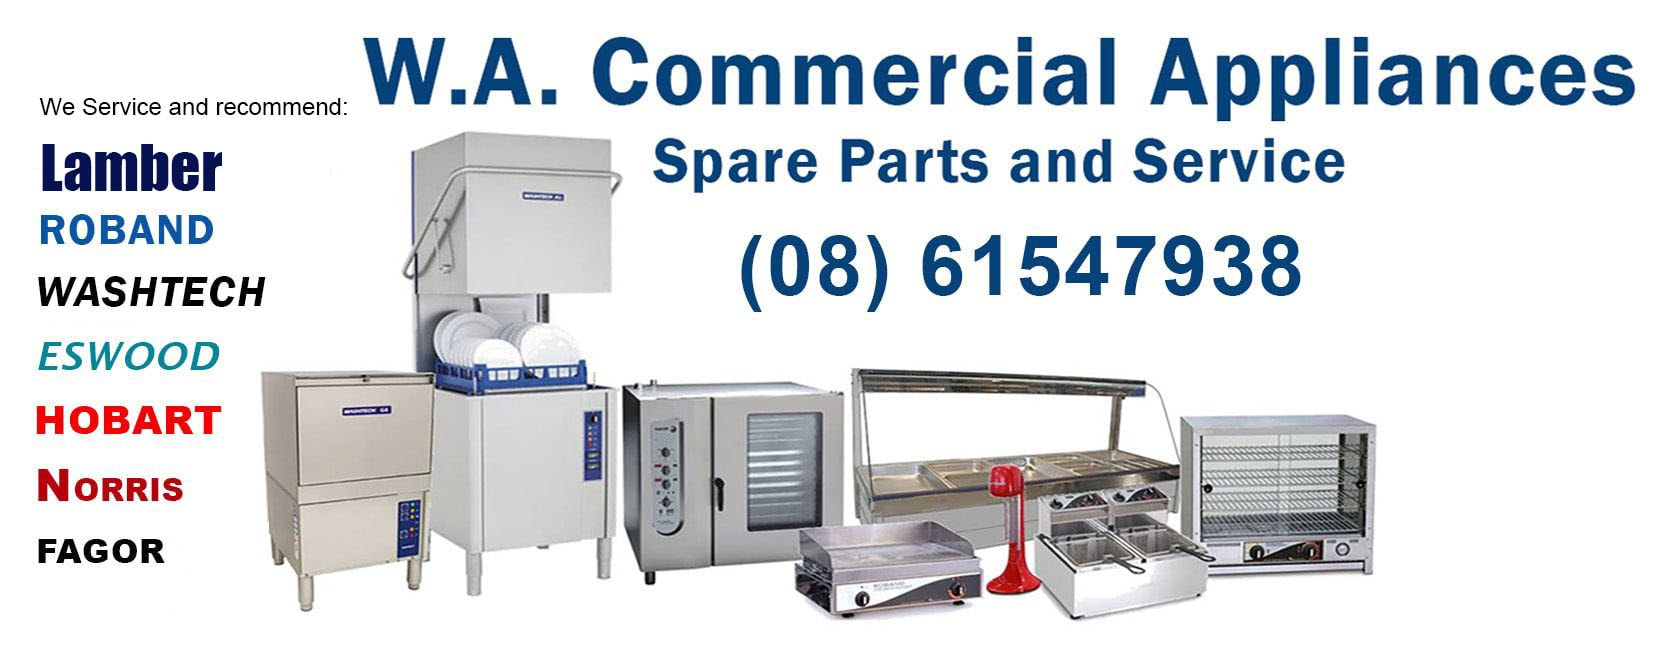 Catering Appliance Parts and Service